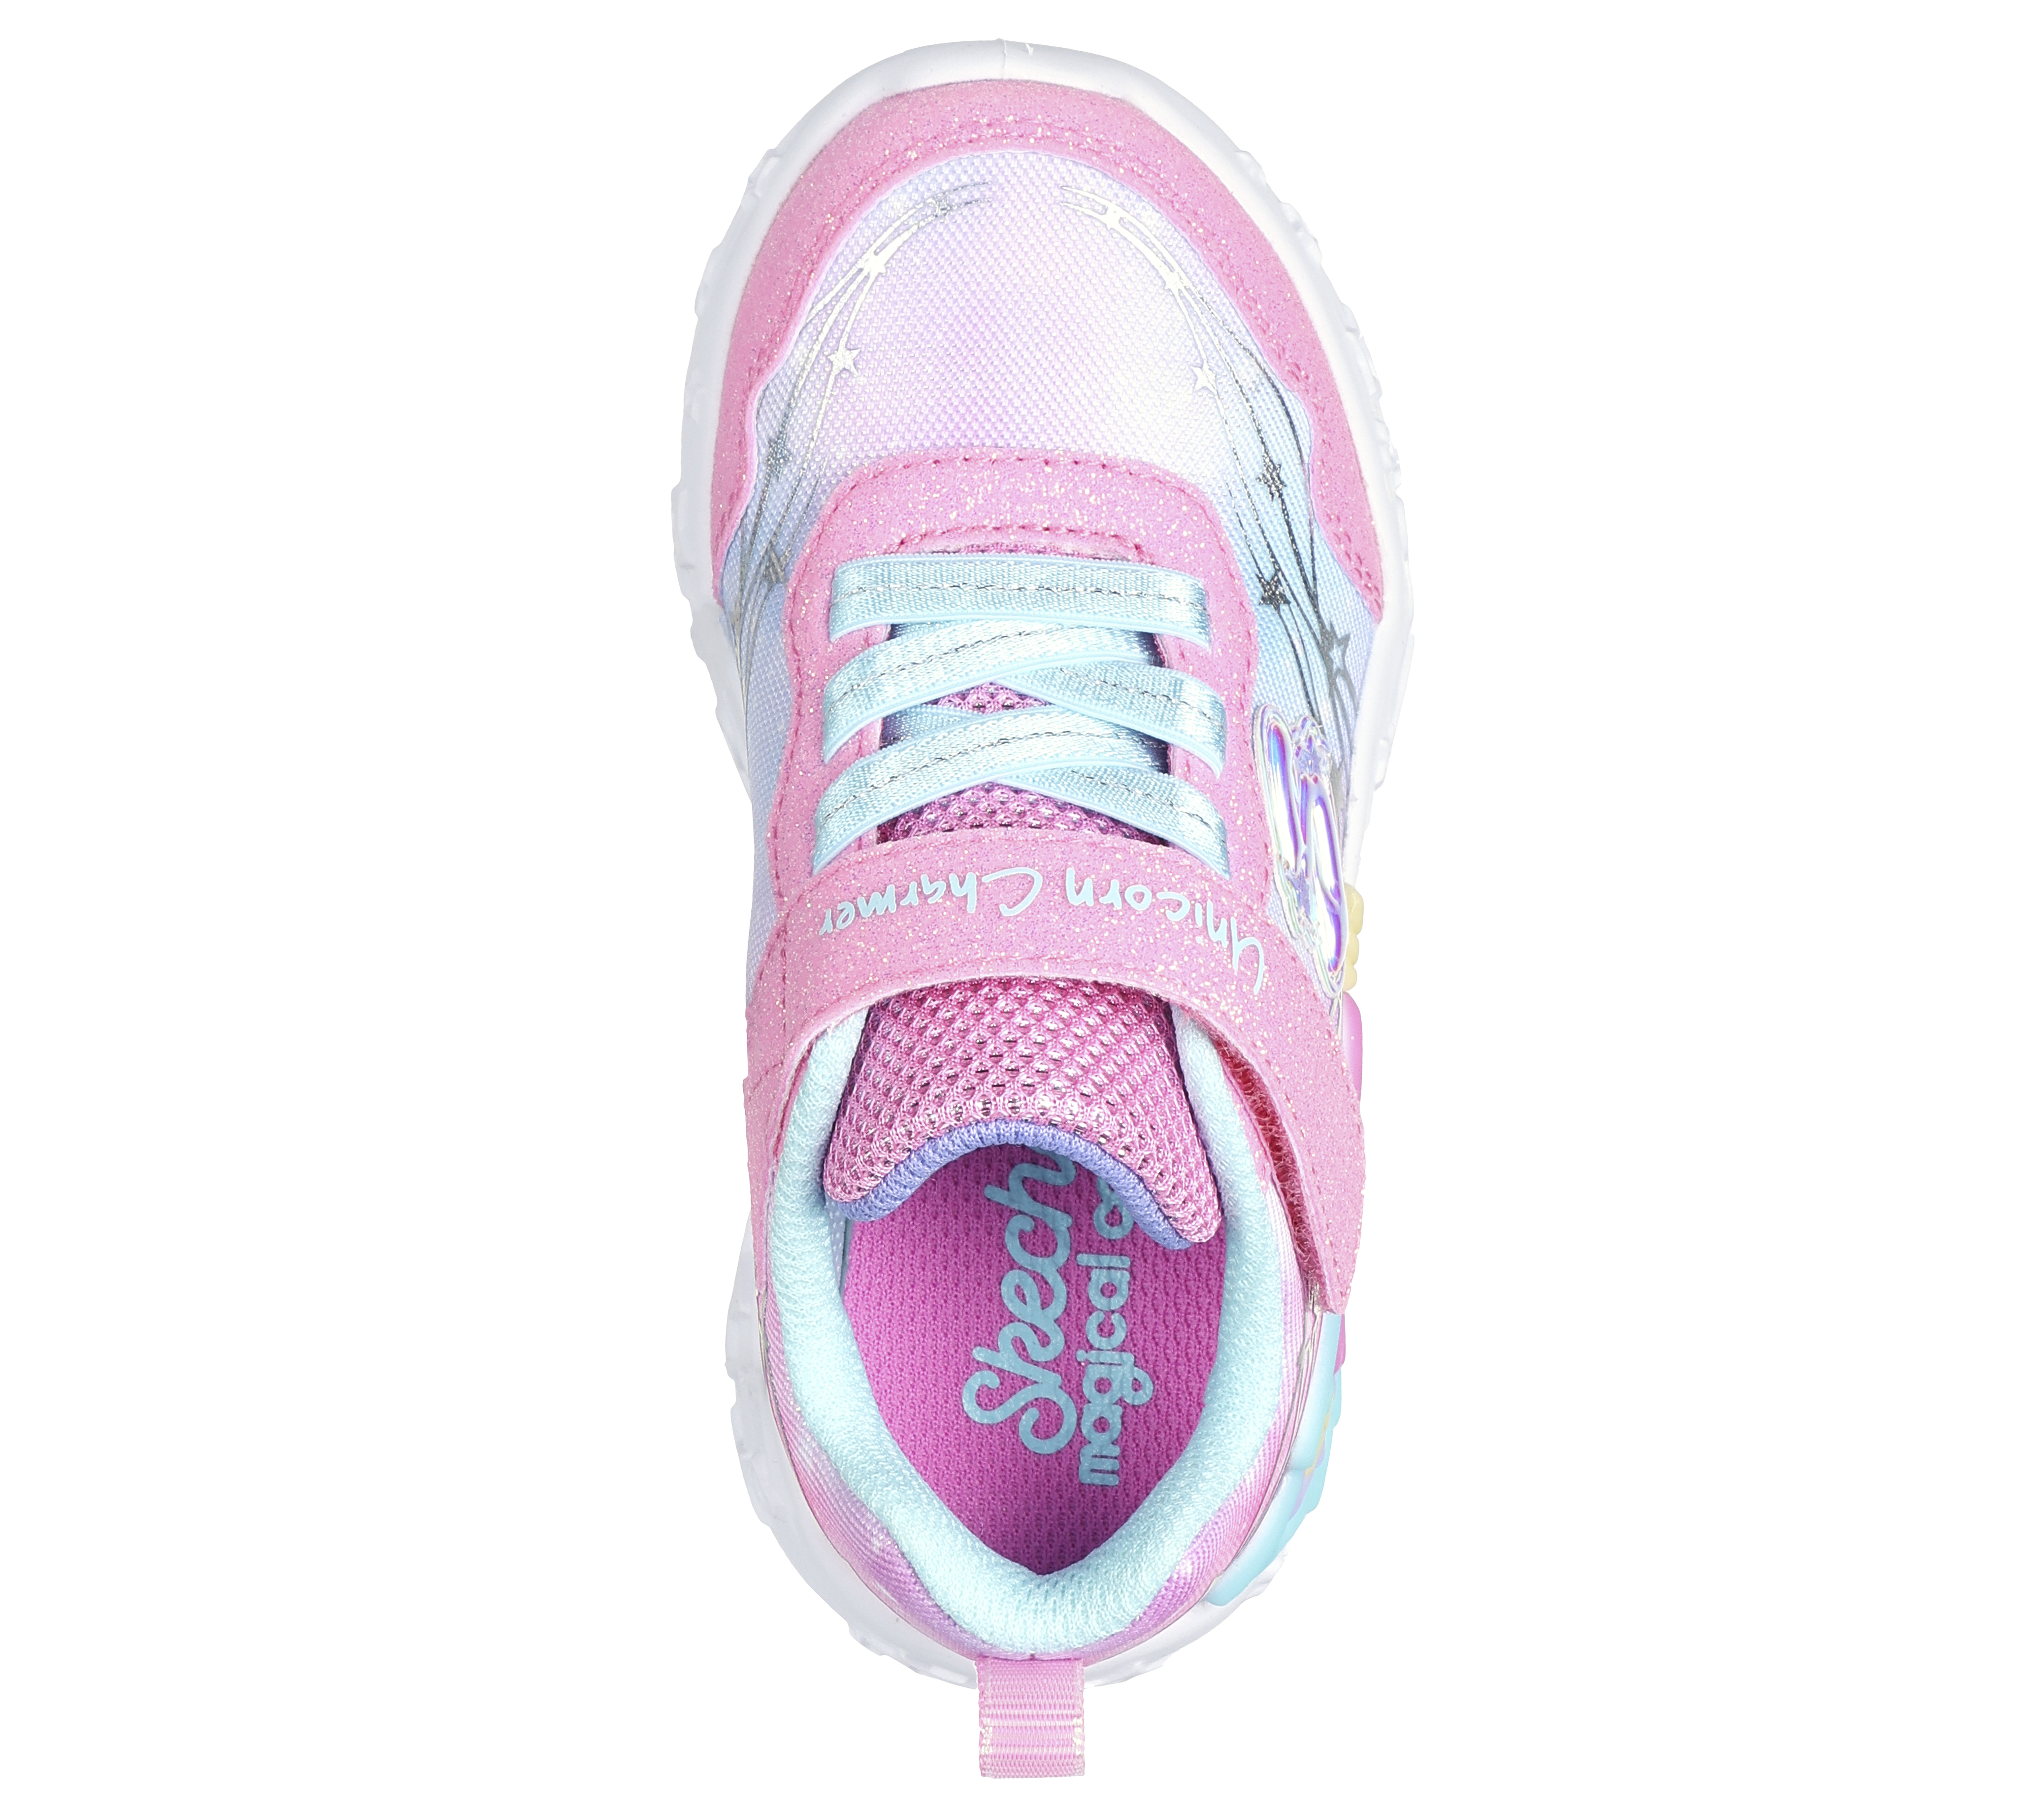 Dobson Footwear - 48 High Street, Normanton - My Little Pony Pink Character  Trainers Sizes- 6,7,8,9,10,11,12 £9.99 Message/Comment To Reserve For Click  & Collect